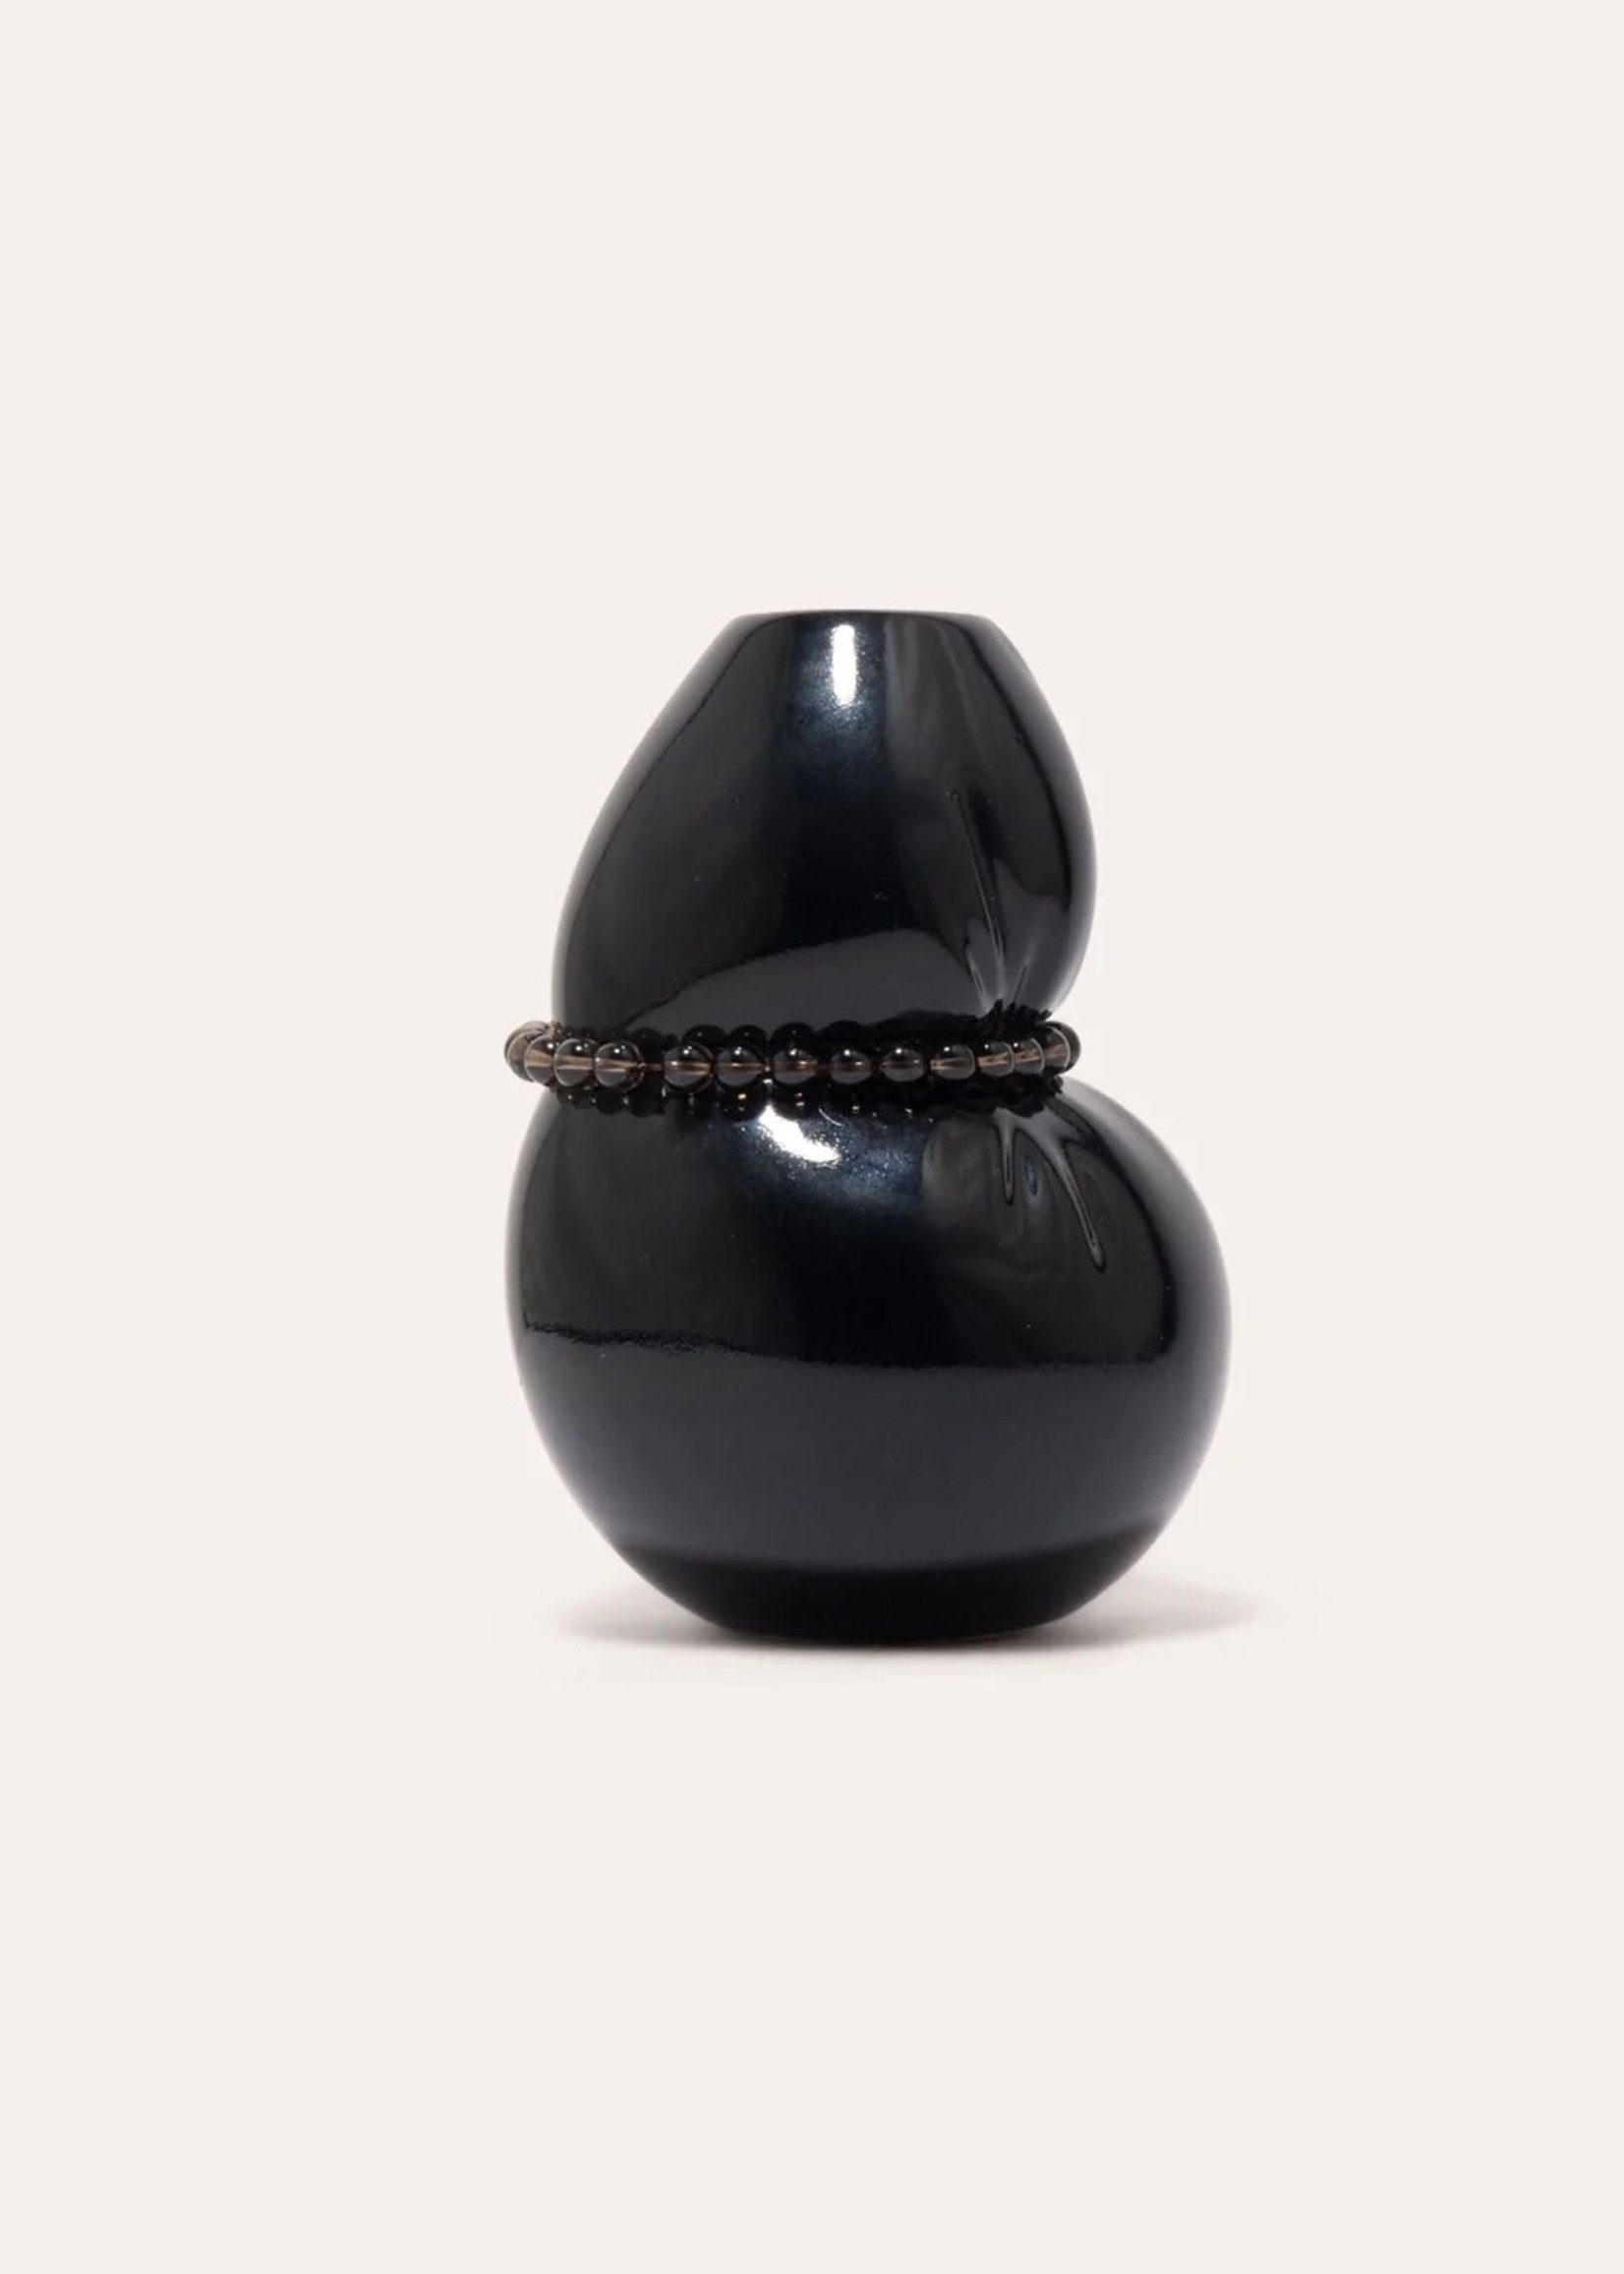 Completedworks Squeezed Vase in Gloss Black with Onyx